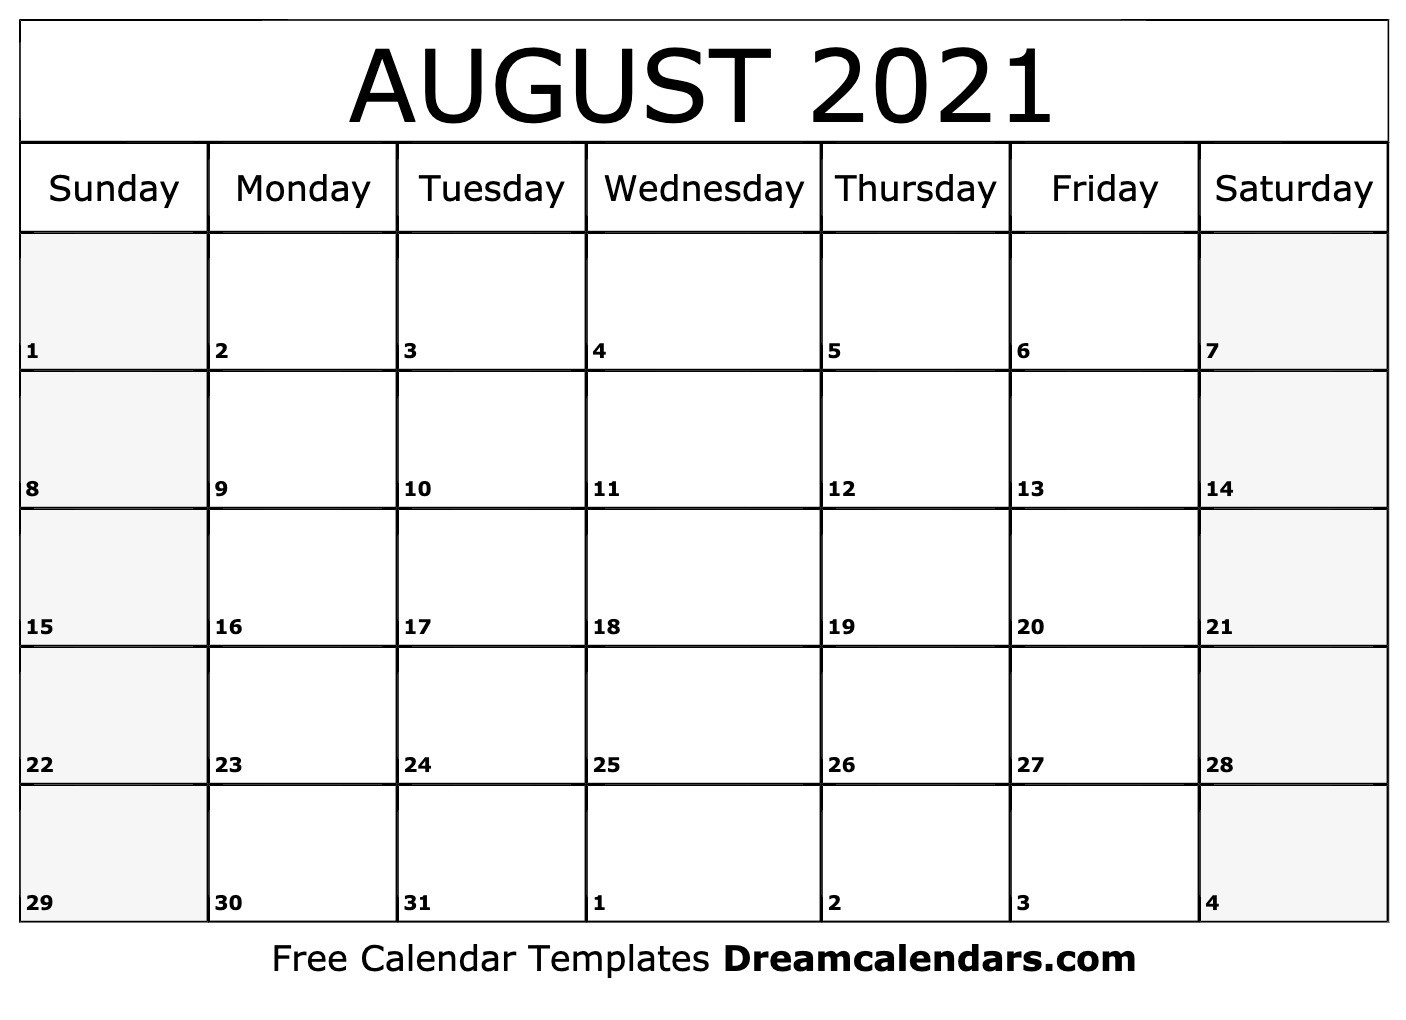 August 2021 Calendar | Free Blank Printable Templates-Appointment Calendar For Month Of August 2021